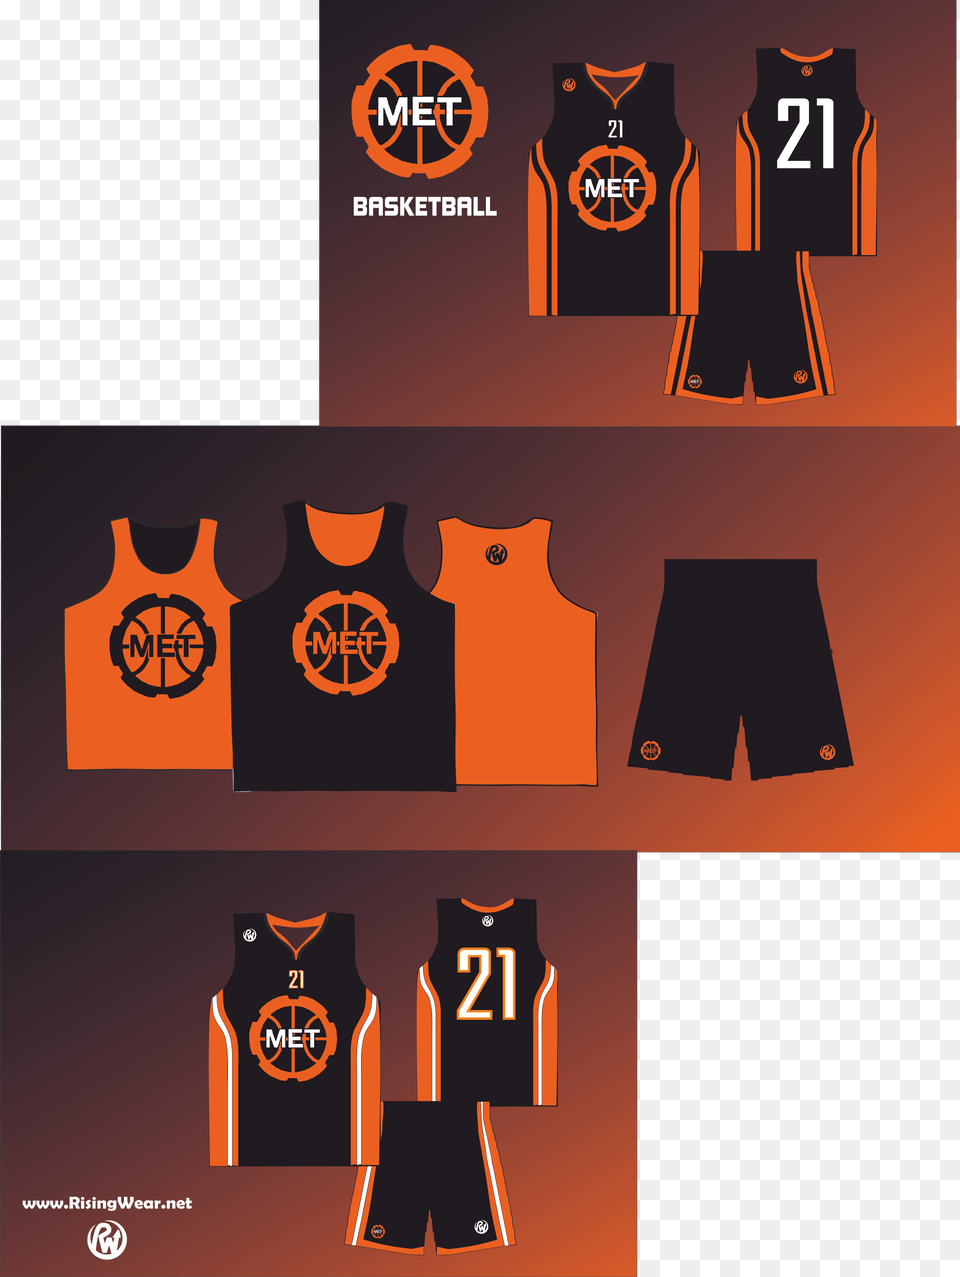 About The Met Basketball Program Basketball, Clothing, Shirt, Vest Free Png